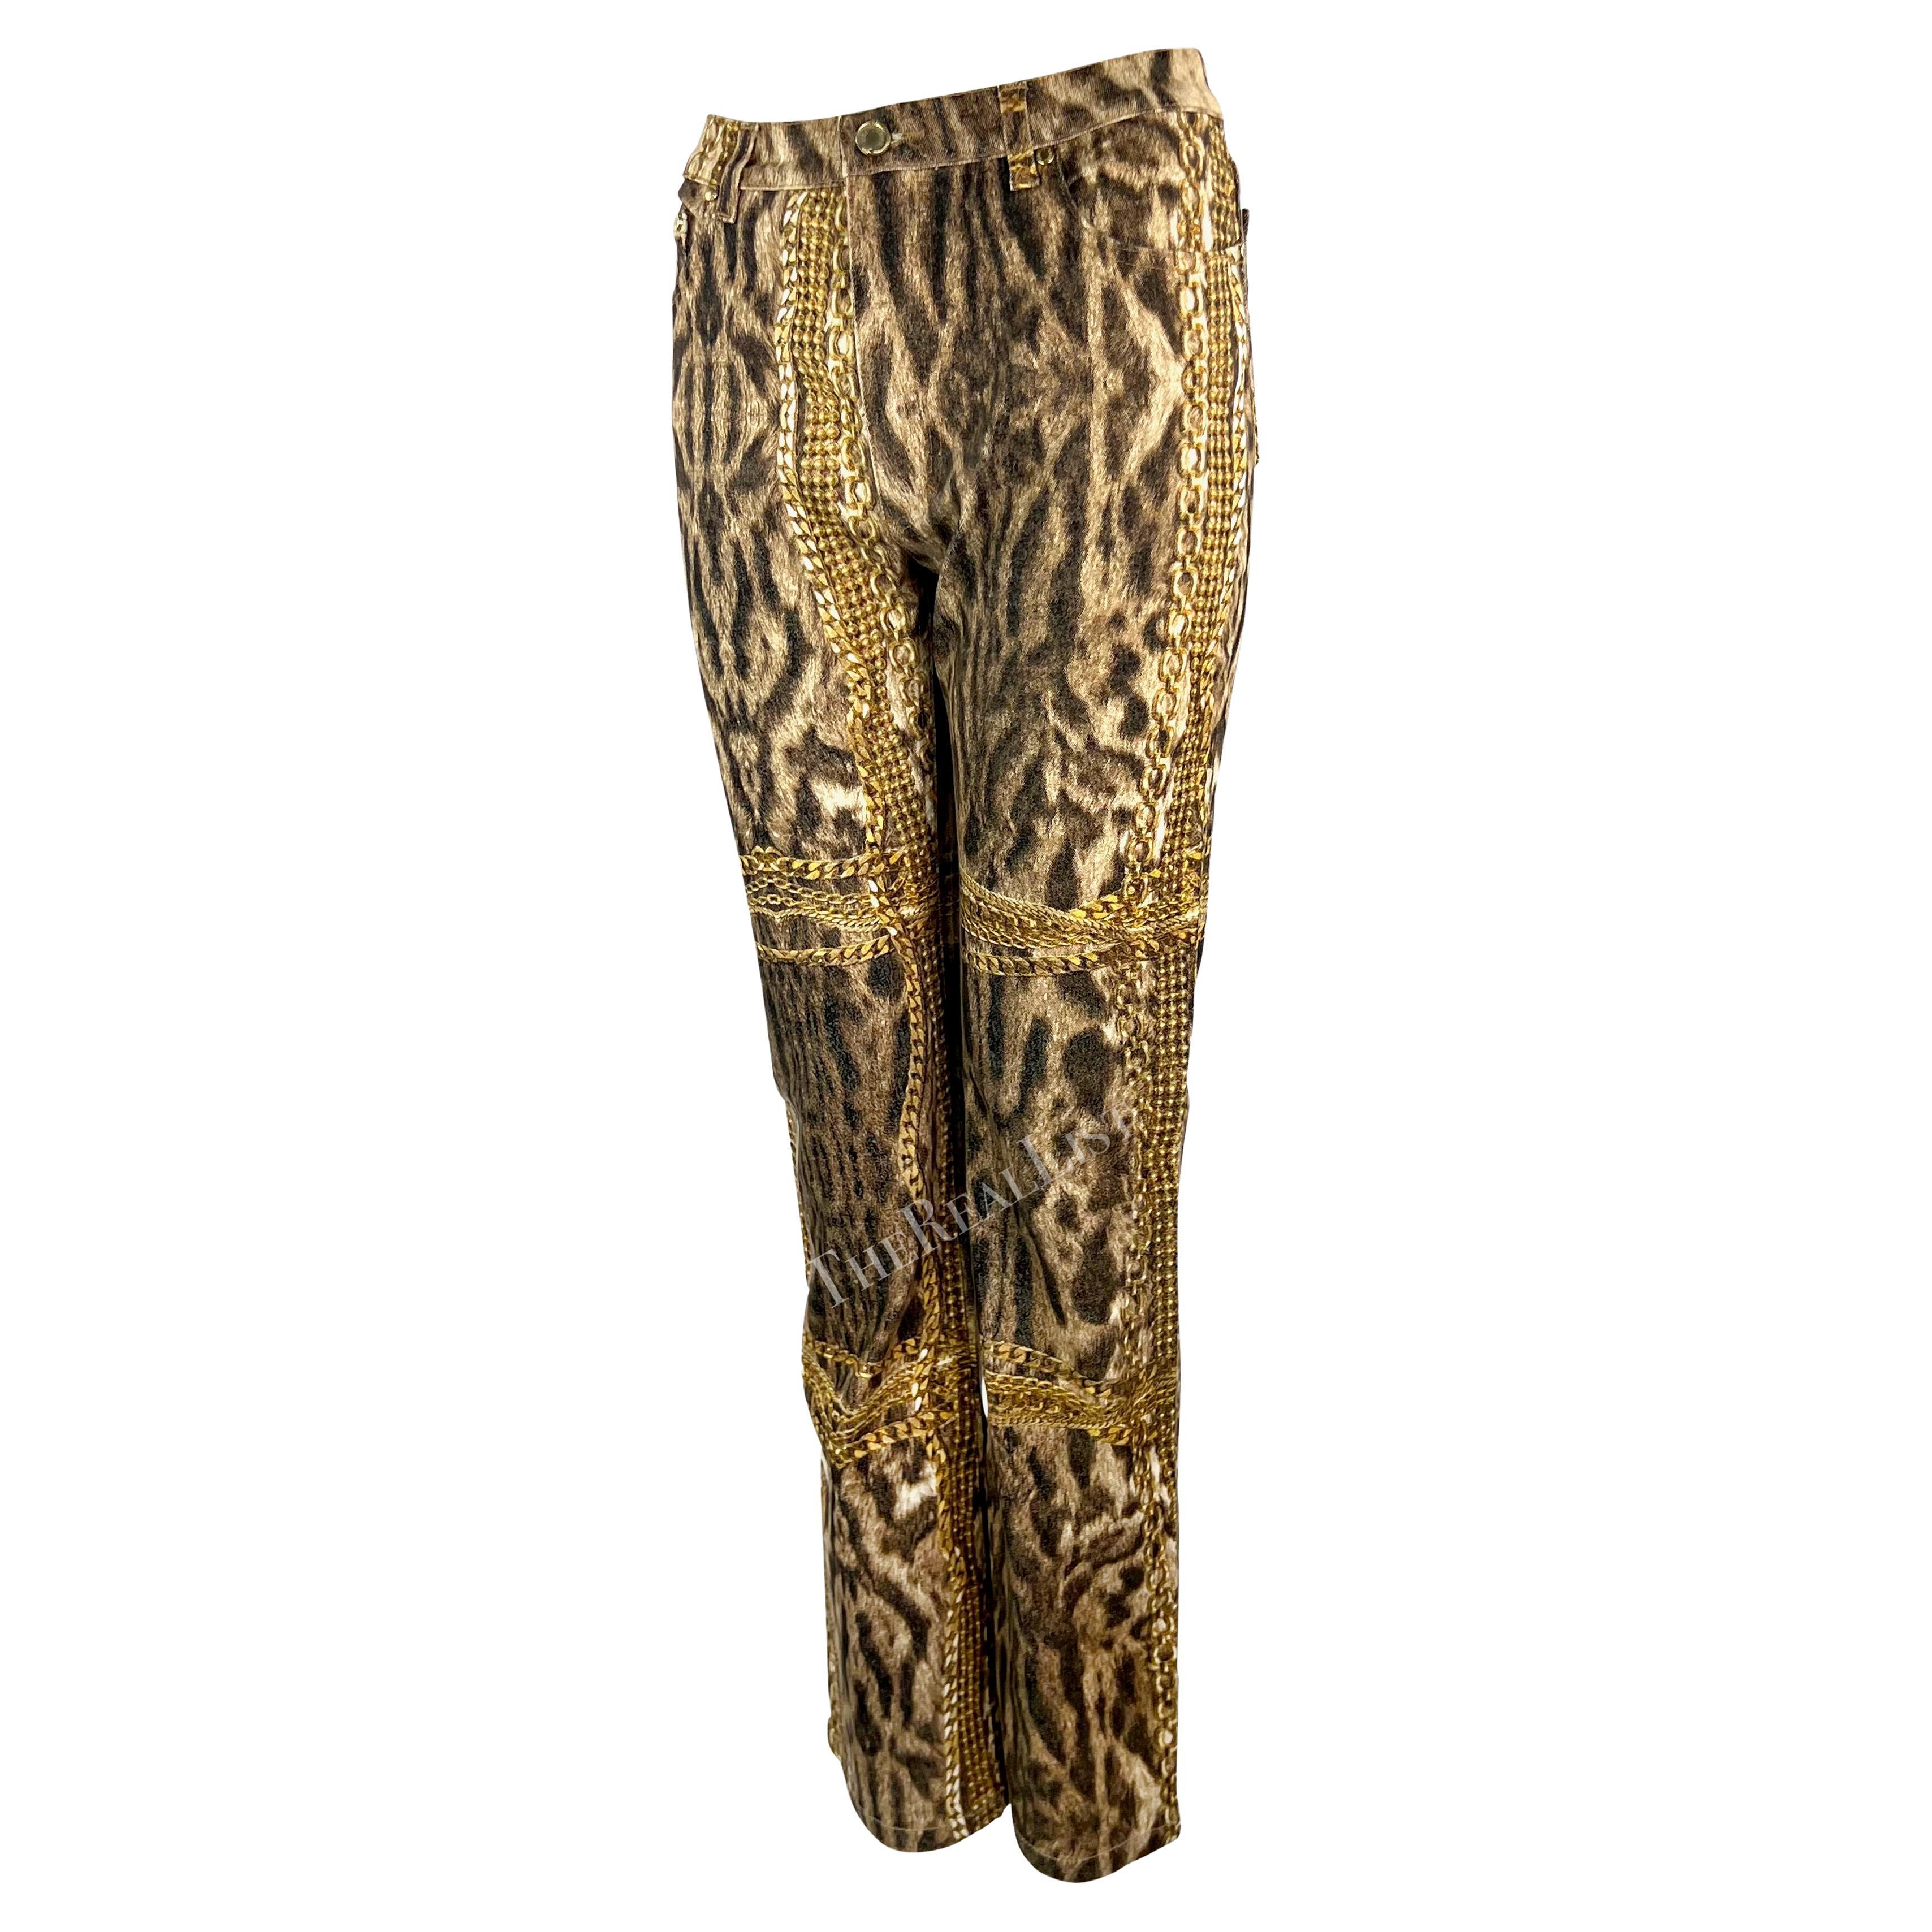 F/W 2003 Roberto Cavalli Animal Gold Chain Trompe l'œil Print Jeans In Excellent Condition For Sale In West Hollywood, CA